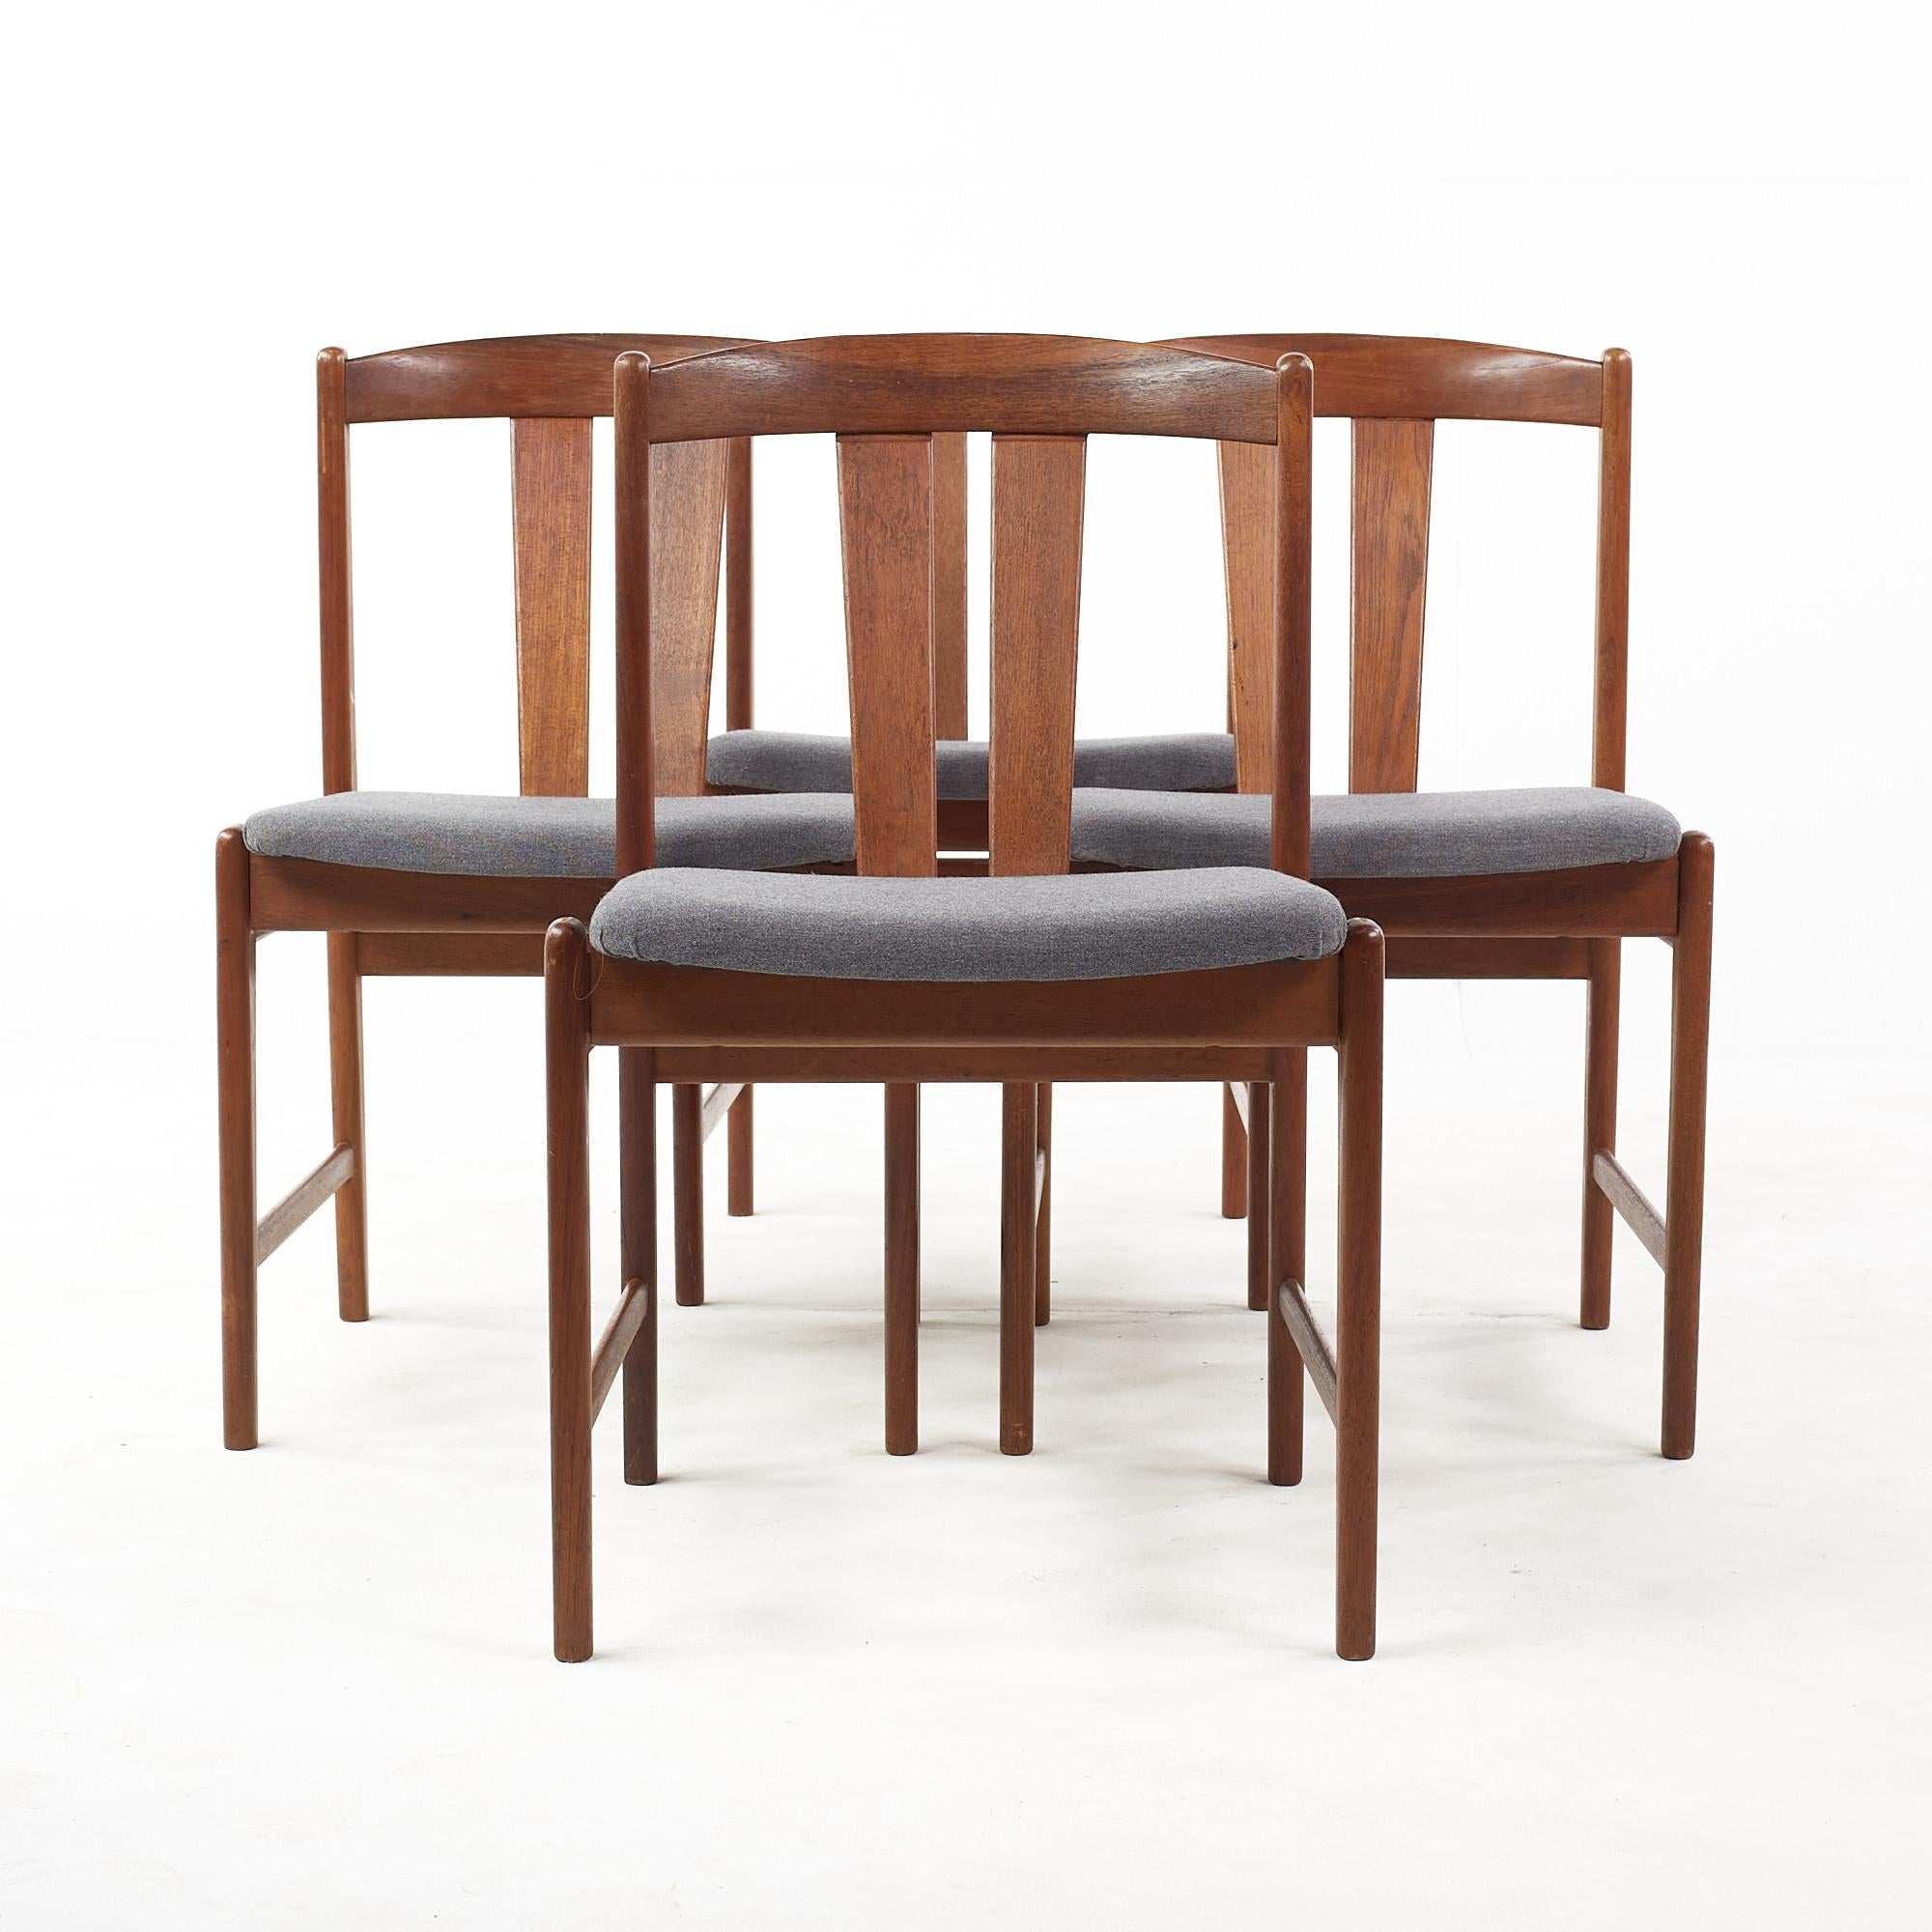 Folke Ohlsson for Dux Mid Century Teak Wishbone Dining Chairs - Set of 4

These chairs measure: 19 wide x 25 deep x 30 inches high, with a seat height/chair clearance of 18 inches

All pieces of furniture can be had in what we call restored vintage